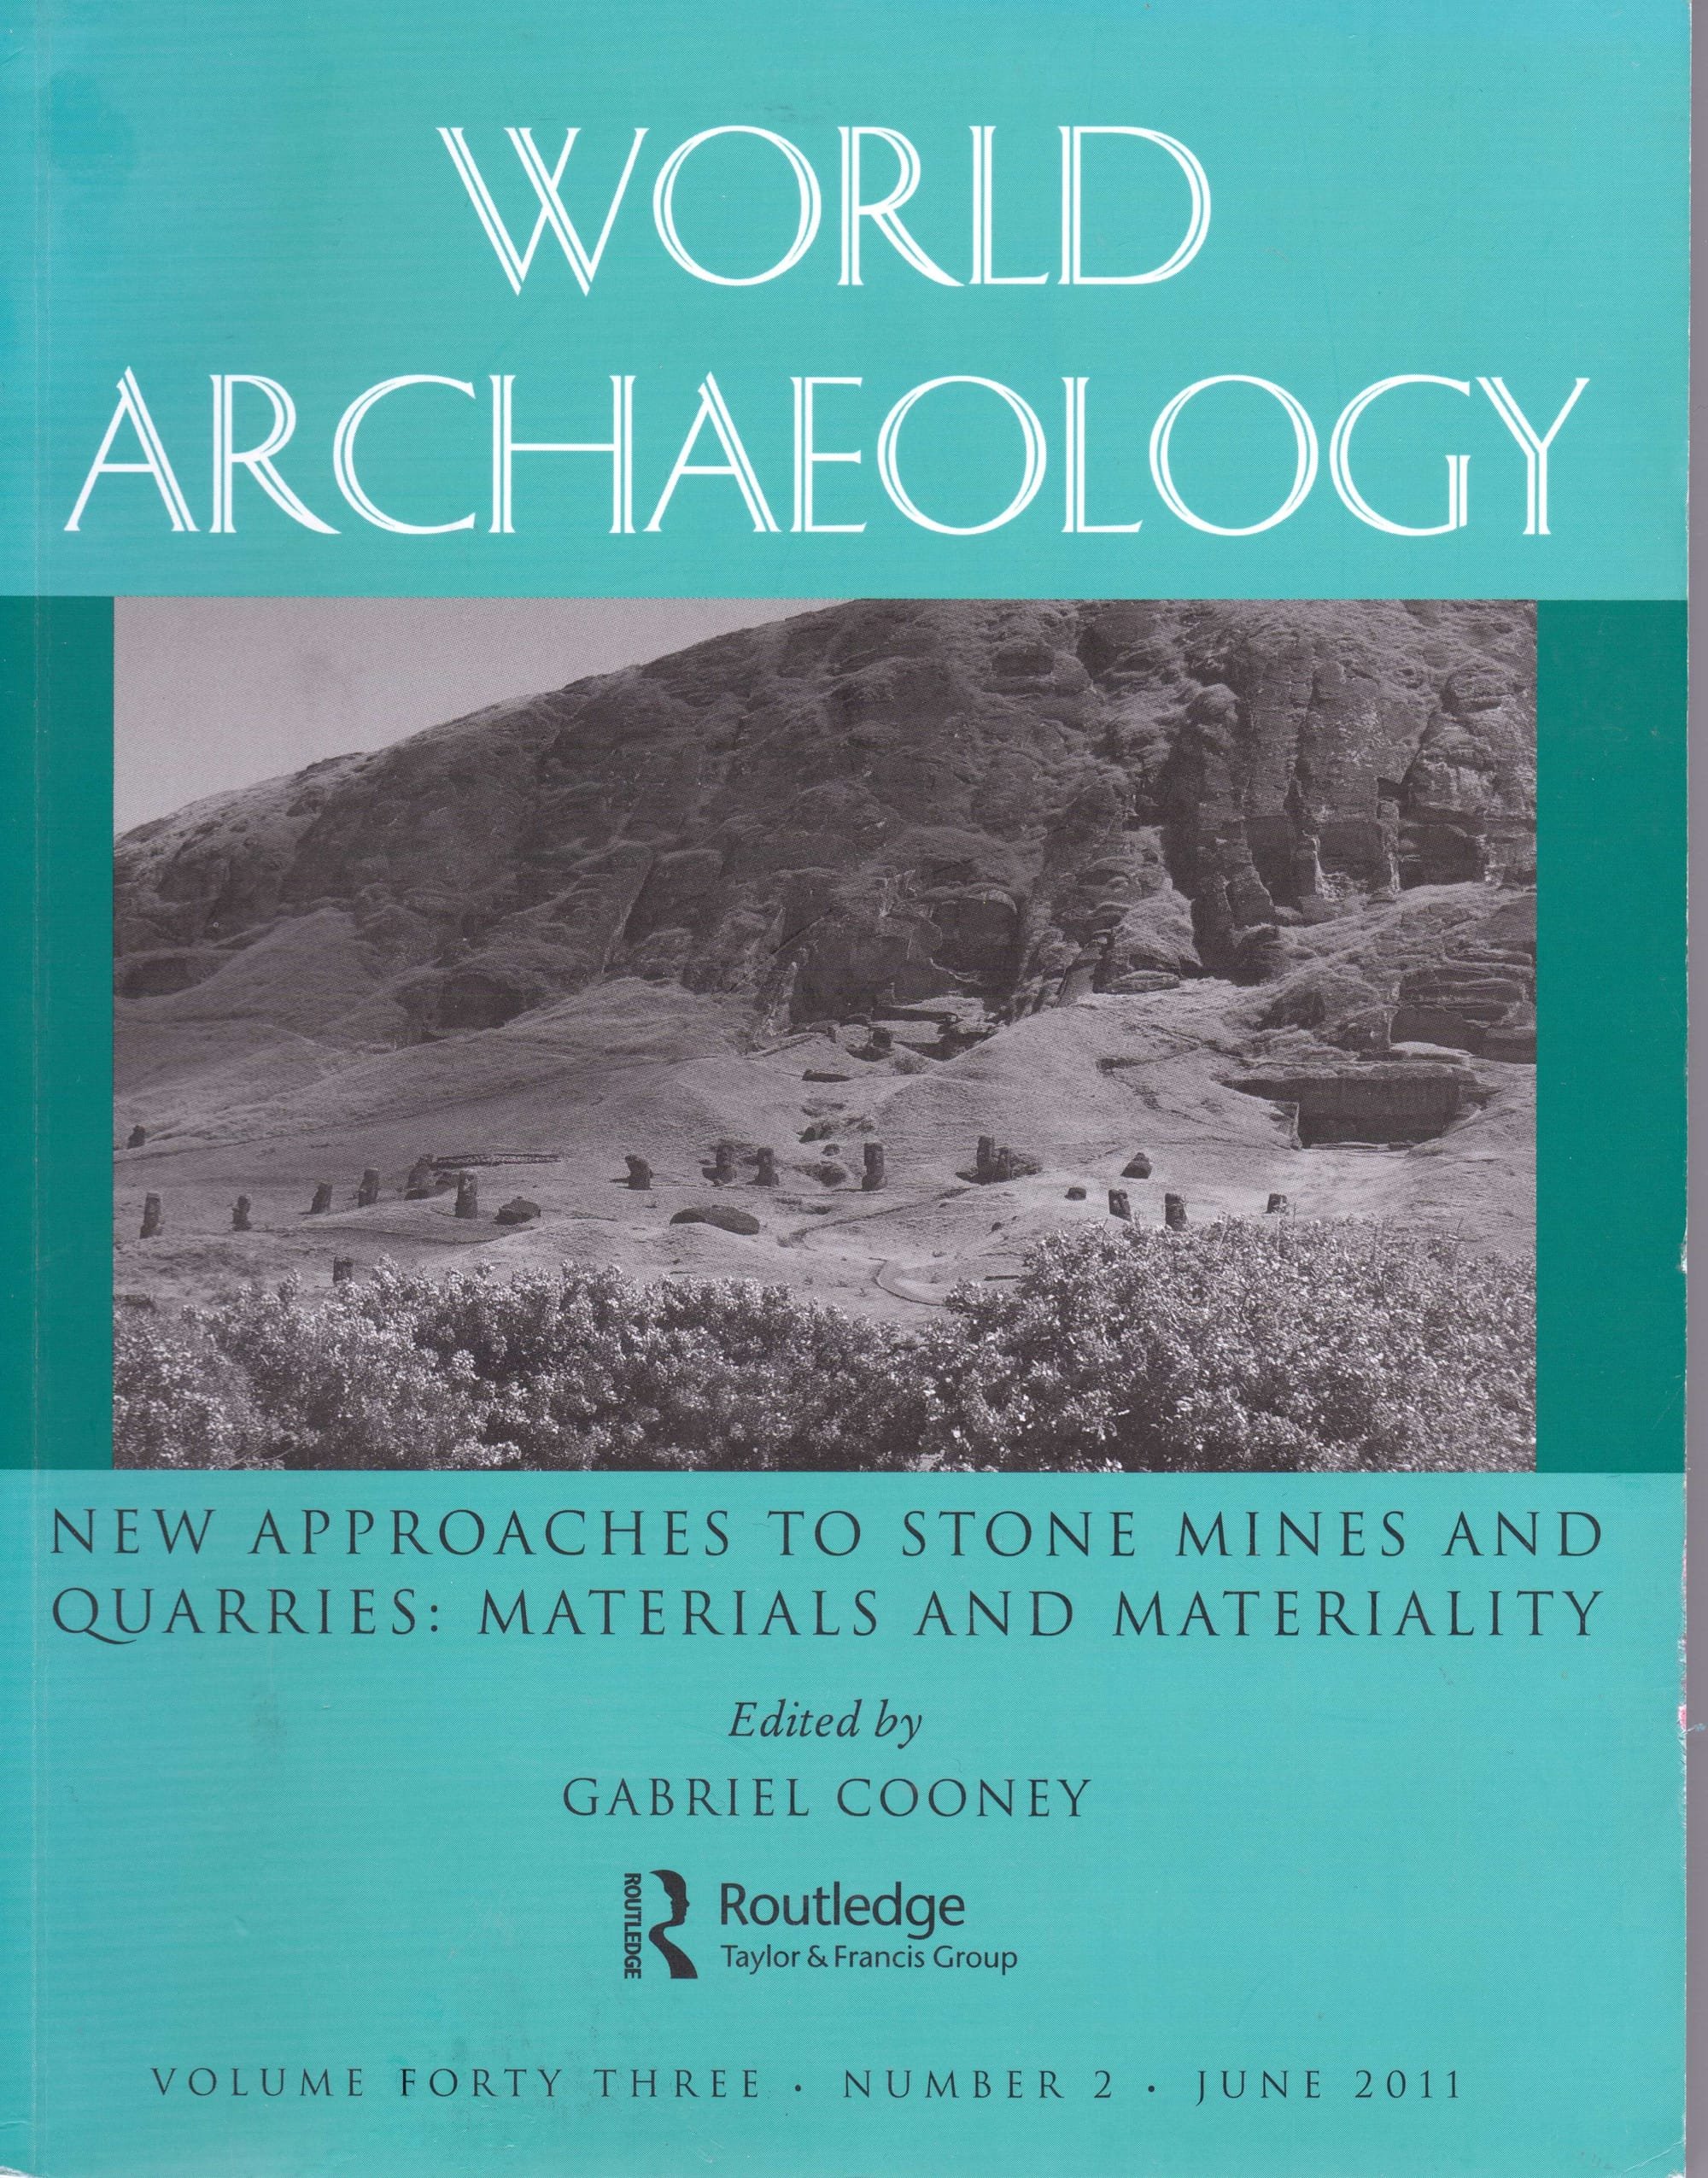 Ancient quarries in mind: pathways to a more accessible significance